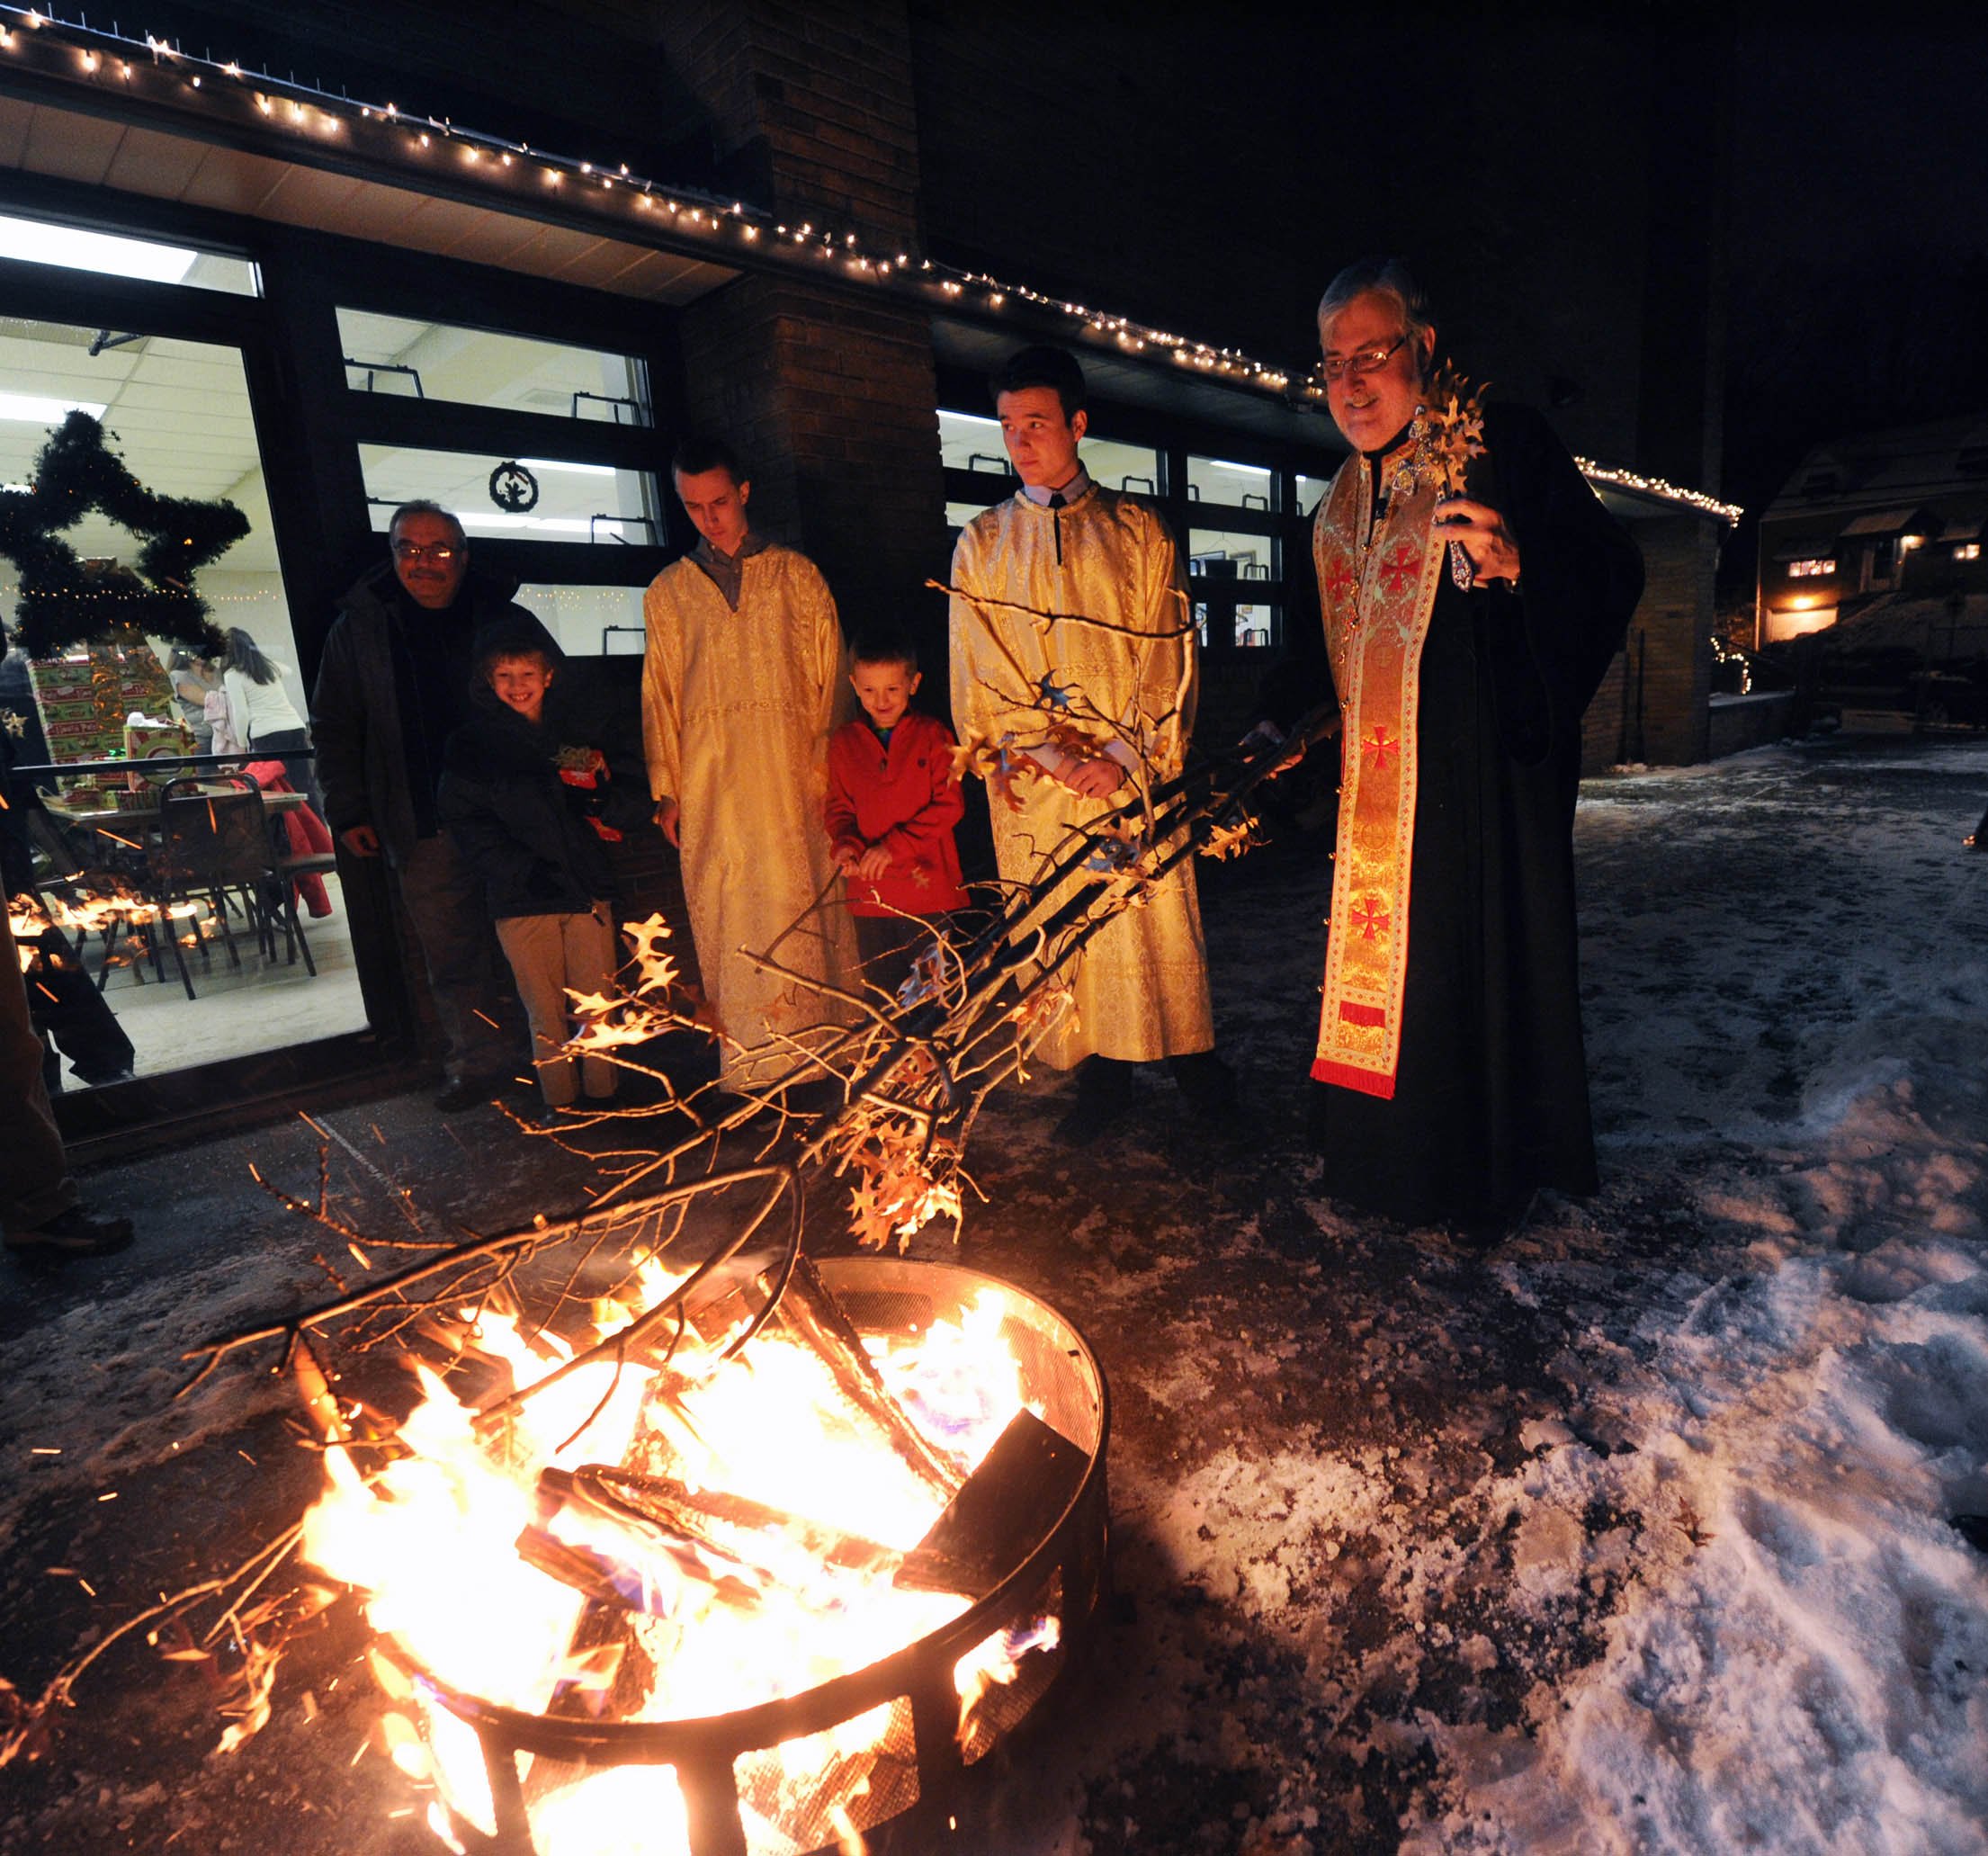 John Heller / Post - Gazette Local / Yule Log McKeesport - Jan. 06, 2014 - Father Stevan Rocknage , right, Pastor of St. Sava Serbian Orthodox Church in McKeesport, oversees the burning of the "Badnjak" or Yule log .The ceremony is usually held out doors but due to extreme cold weather, the Orthodox Christmas Eve service was held in the parish hall under the church. Only the burning of the log was outdoors.